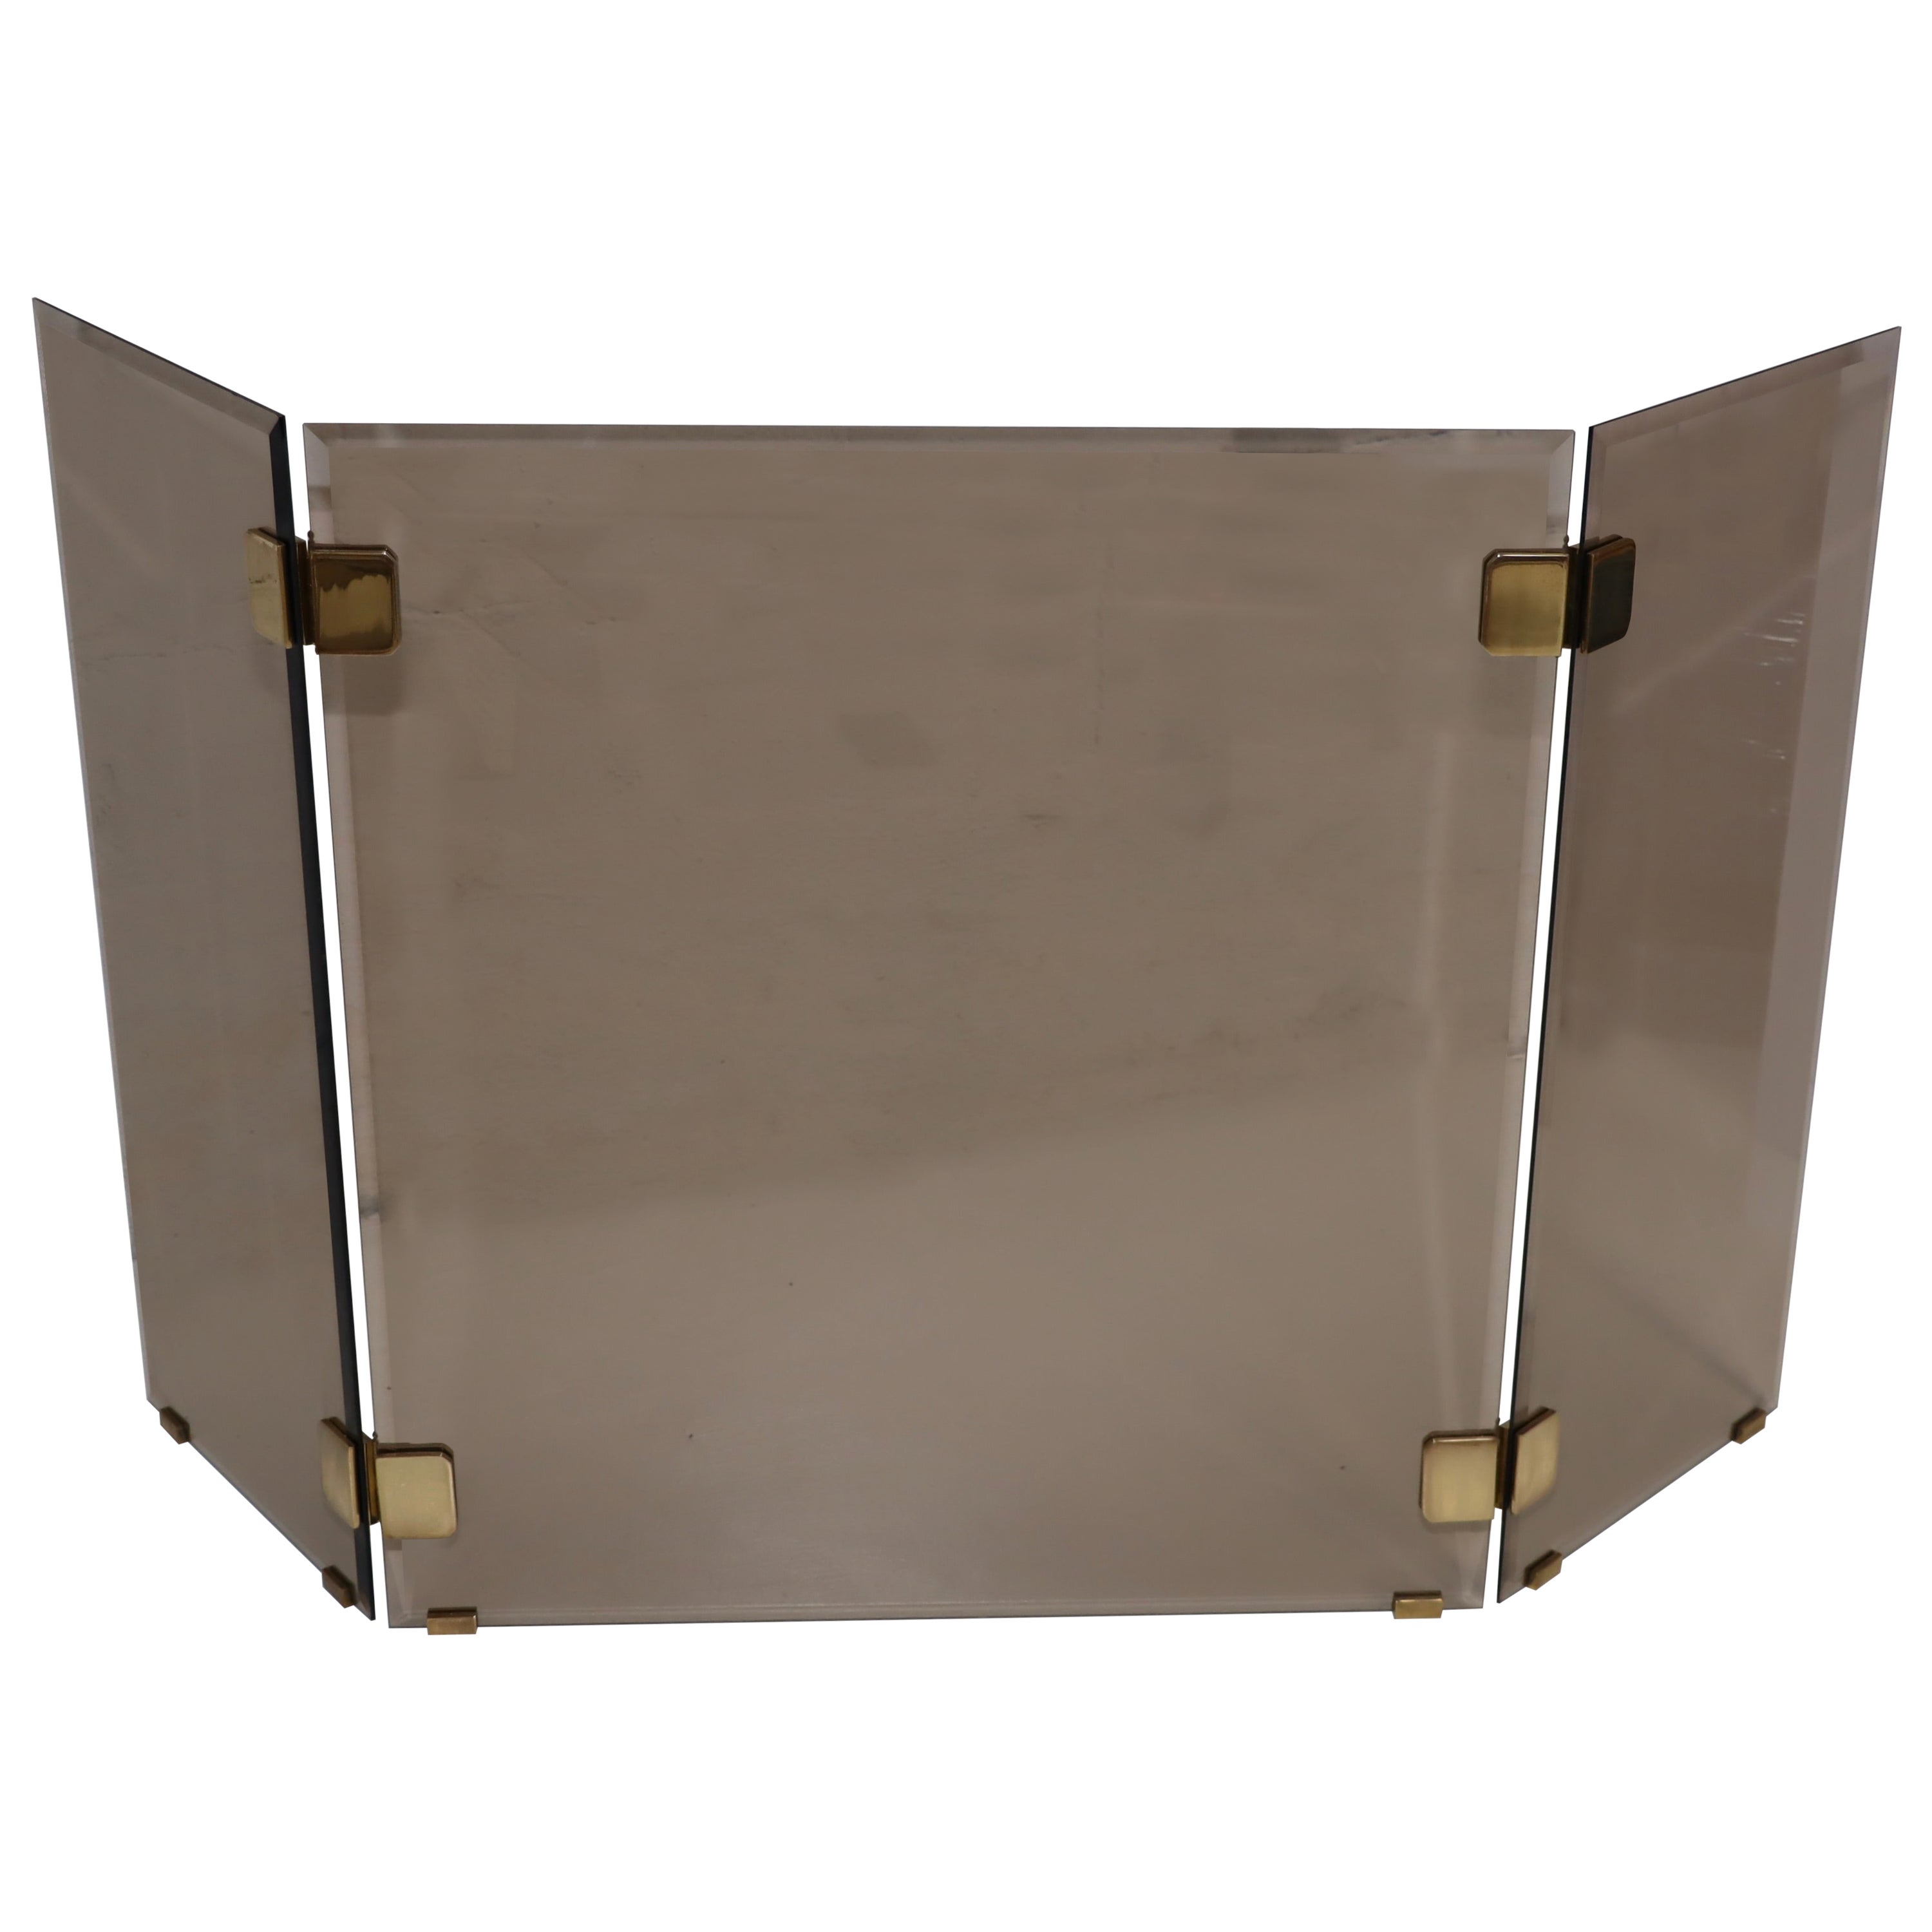 1980's Brass And Glass Tri-Fold Fireplace Screen For Sale